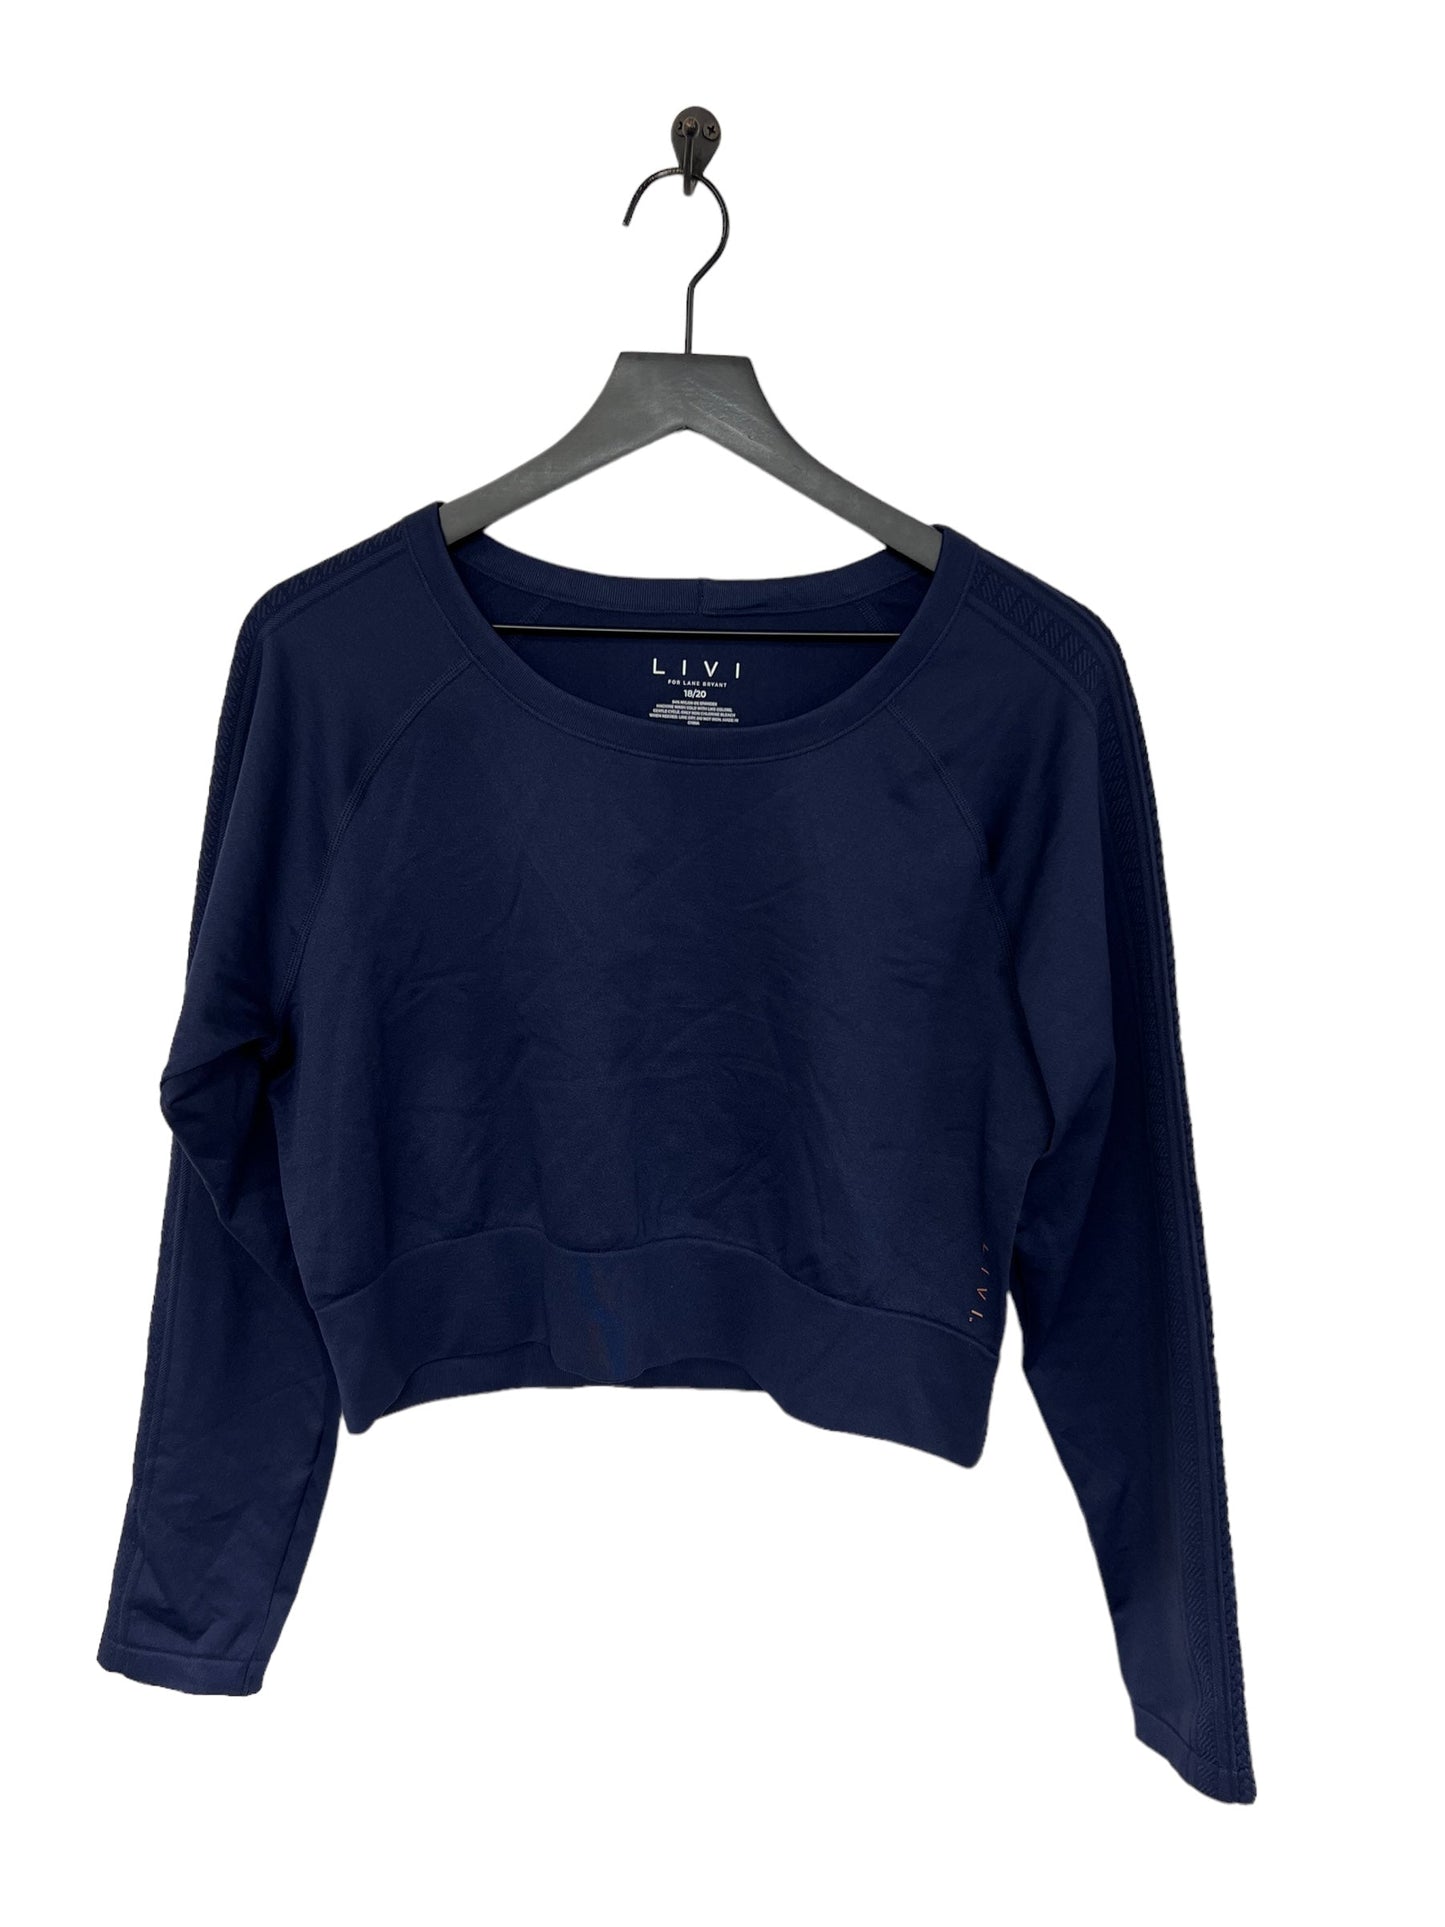 Athletic Top Long Sleeve Crewneck By Livi Active  Size: 1x